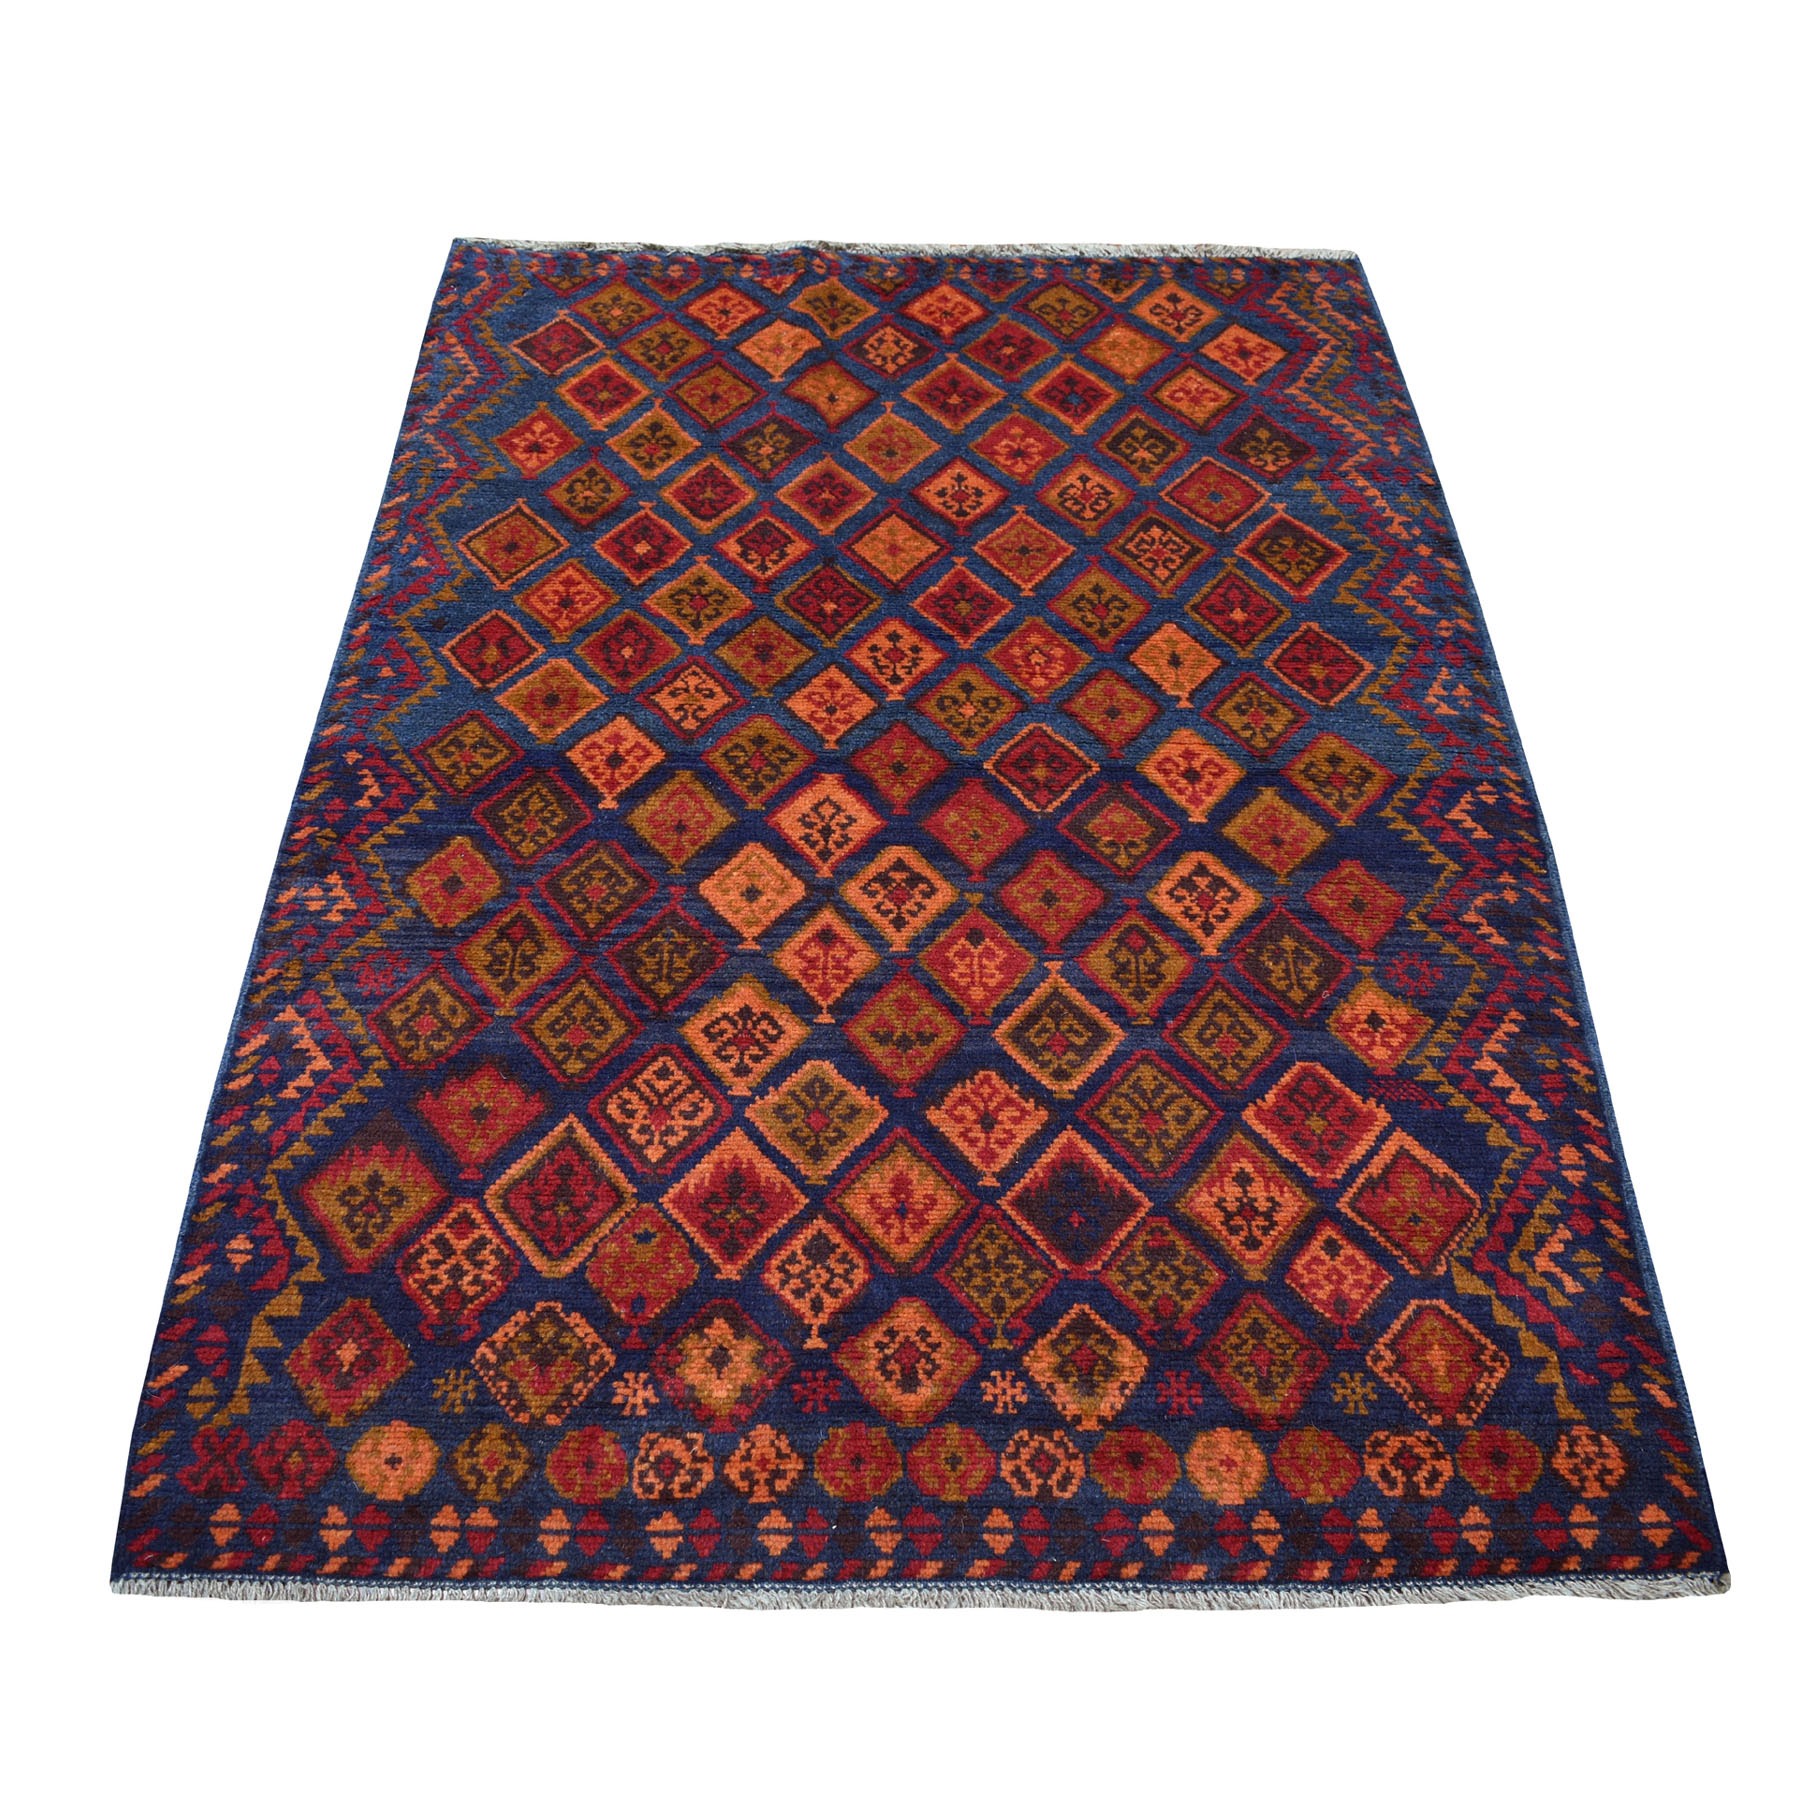 4'X5'6" Red Colorful Afghan Baluch Geometric Design Hand Knotted 100% Wool Oriental Rug moaecaed